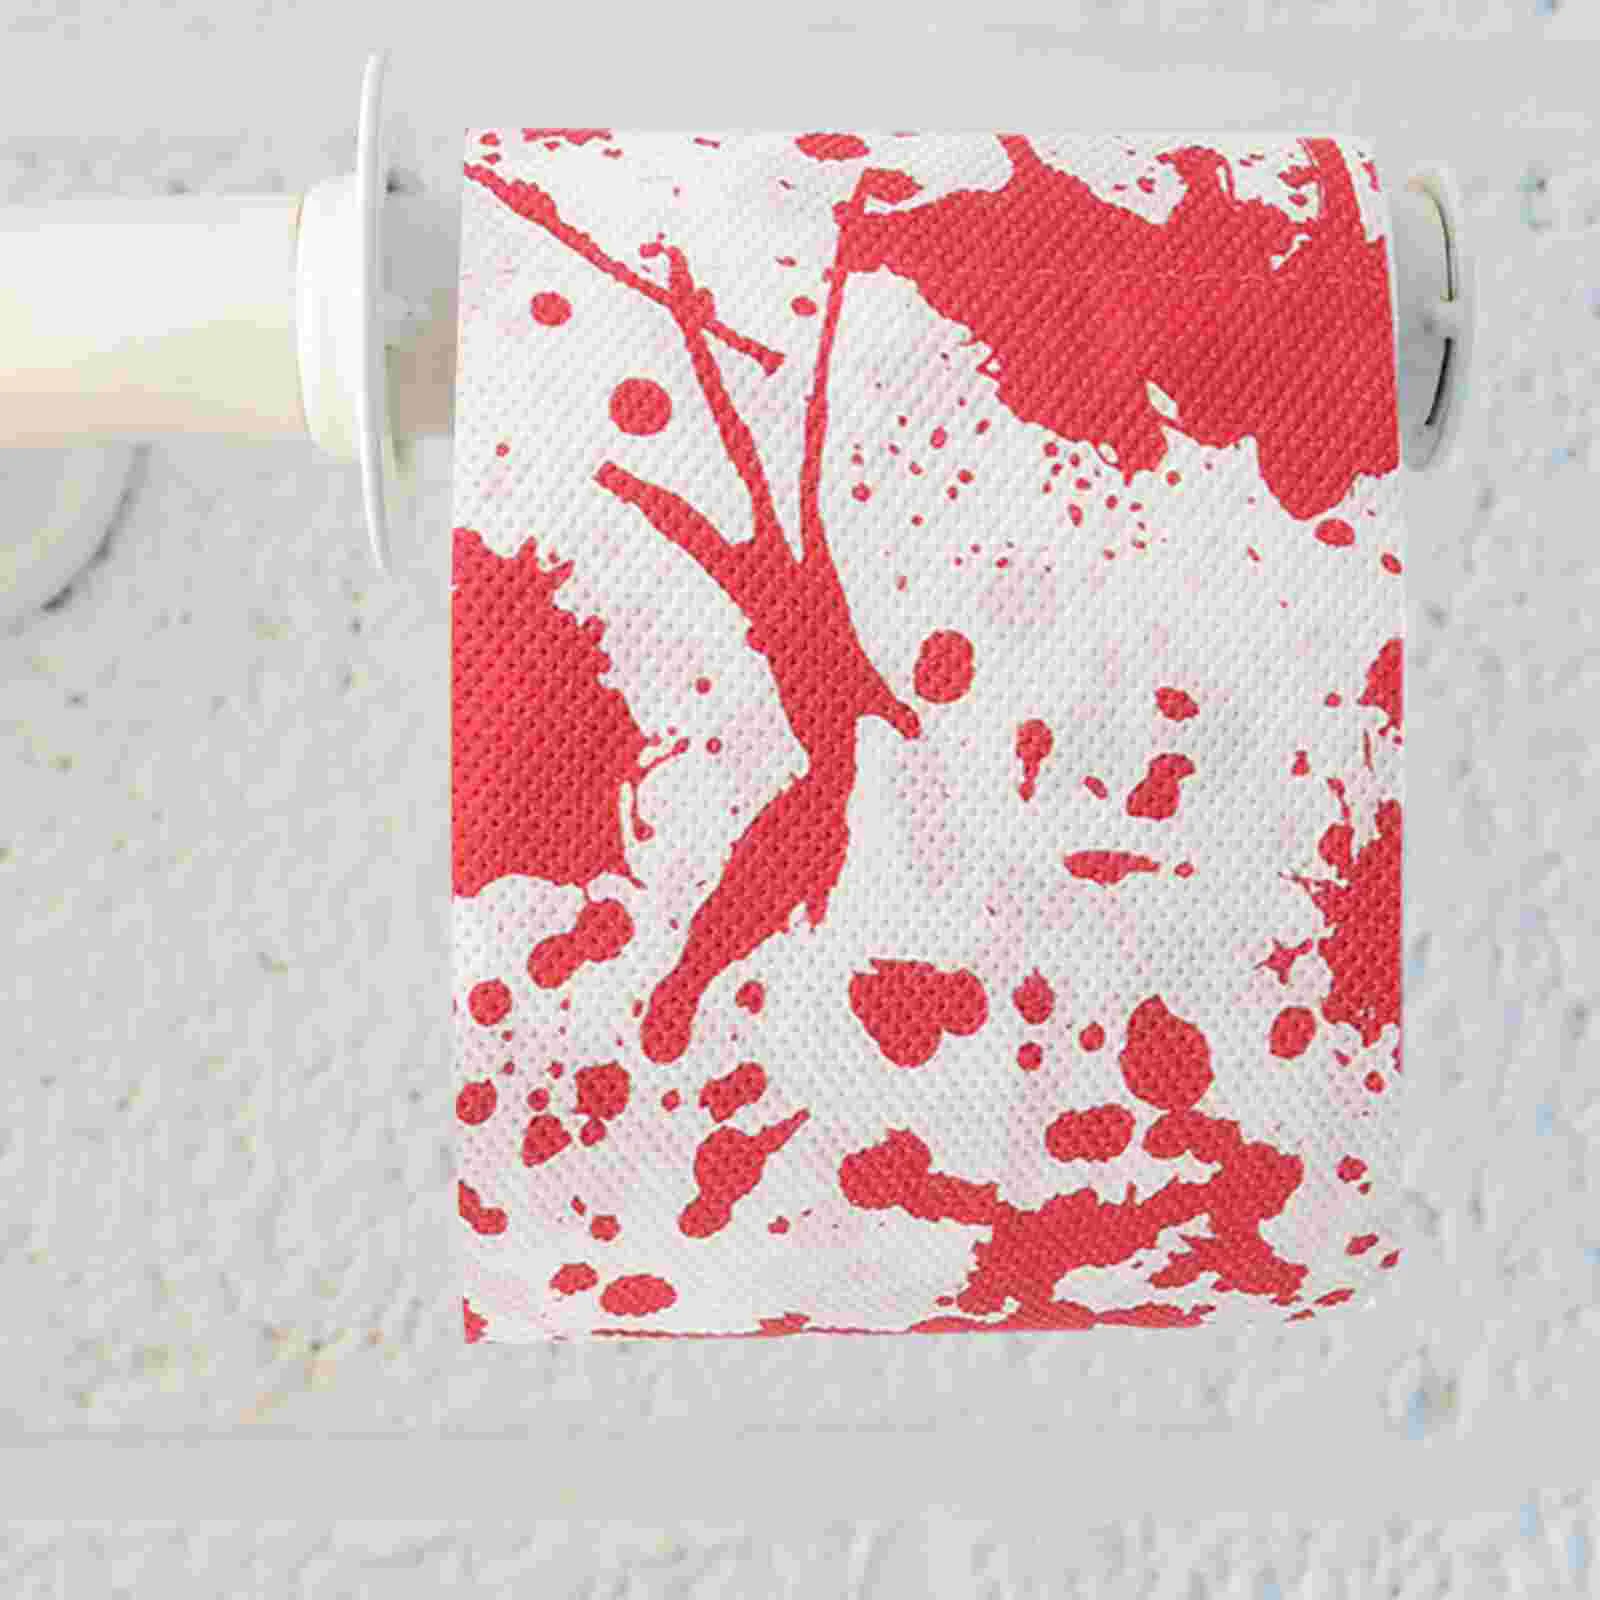 

1 Roll Bloodstain Toilet Paper Scary Printed Roll Paper Roll Paper Bathroom Toilet Paper Roll